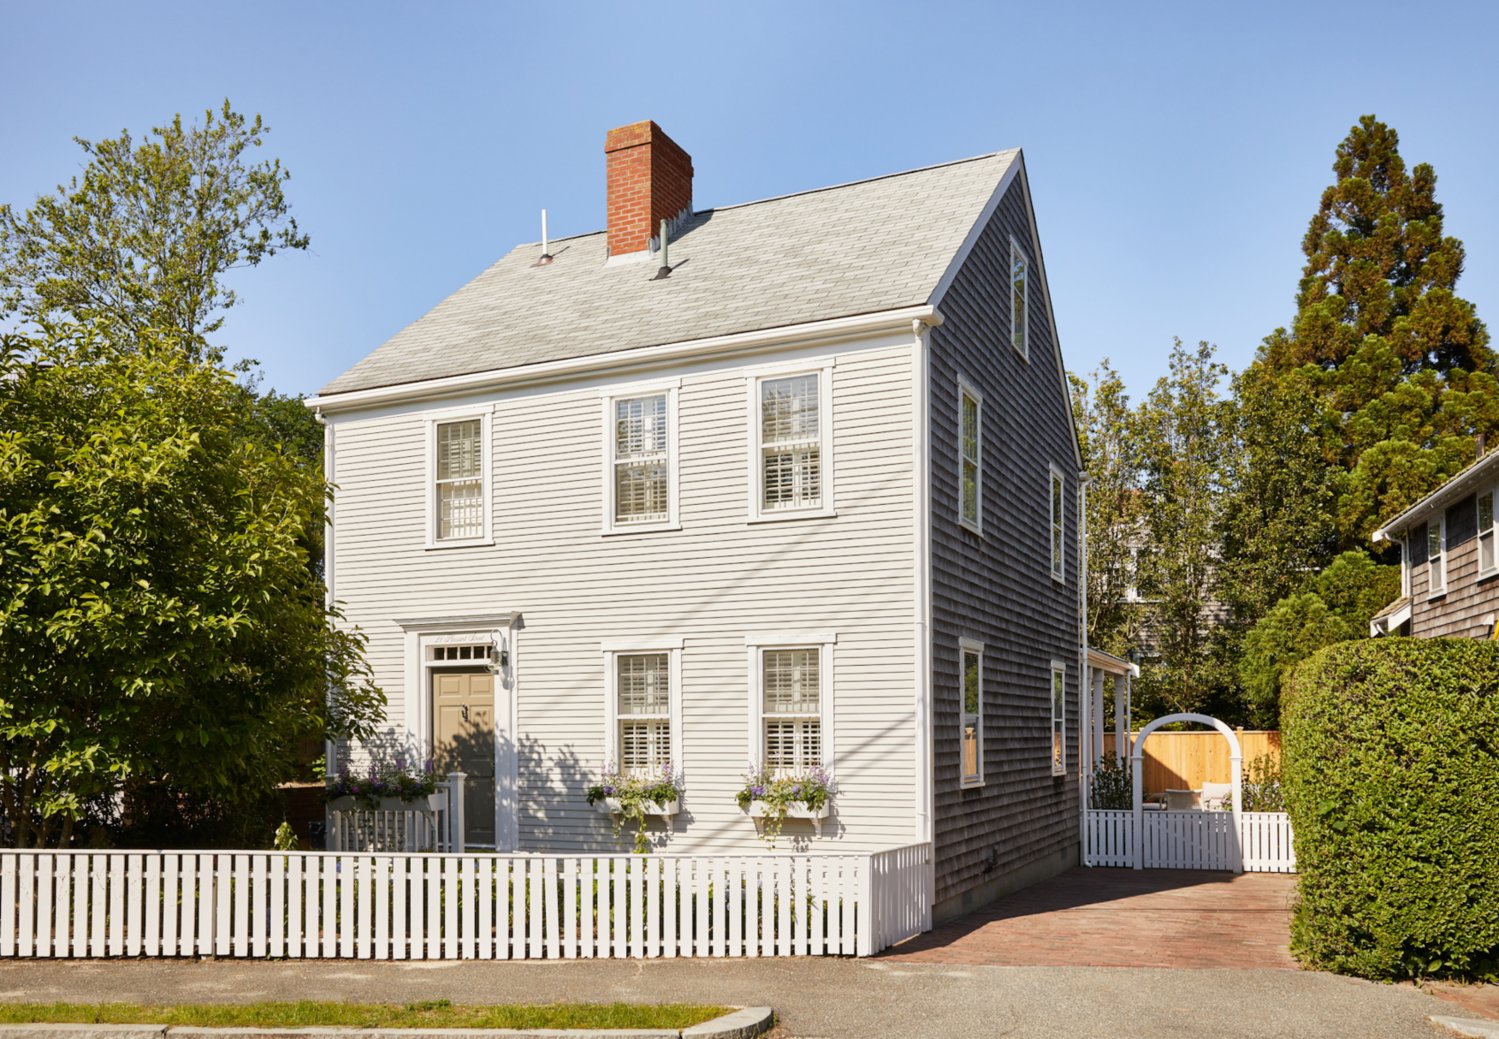 This five-bedroom, five-bathroom home, located in the heart of historic downtown Nantucket, is a short distance from the island’s best restaurants, shops and entertainment venues.